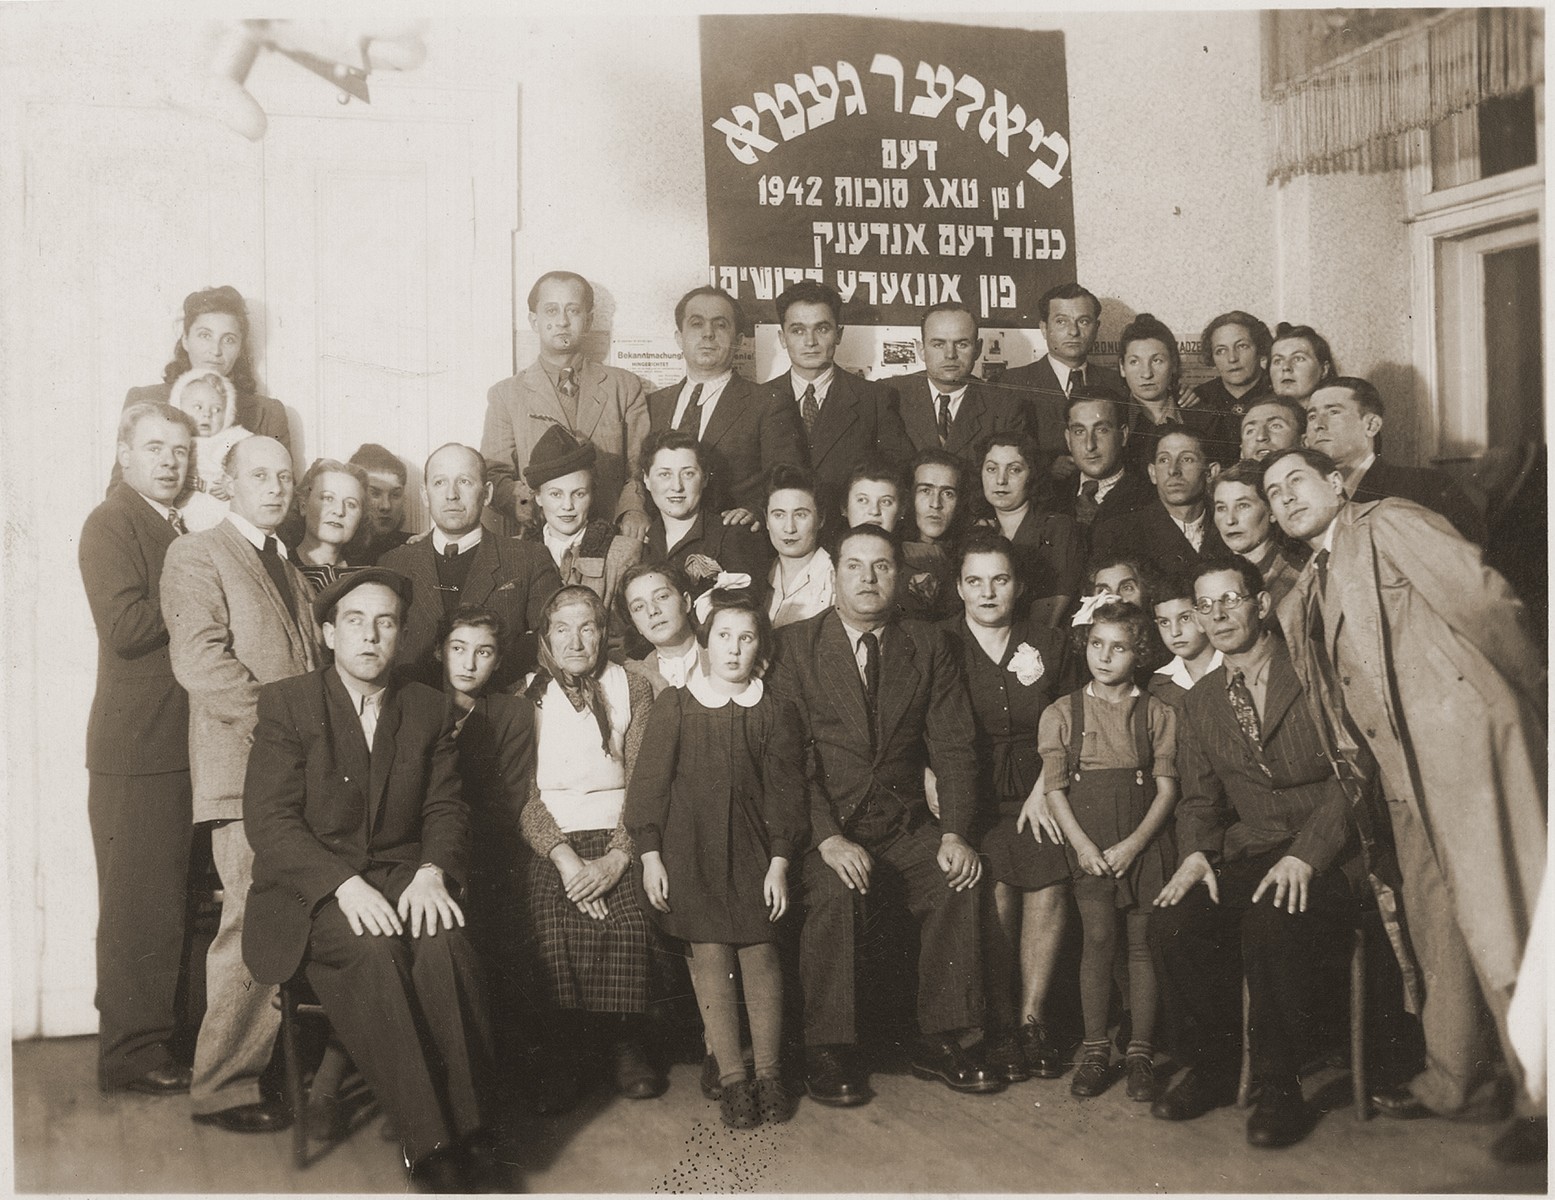 Groups portrait of survivors of the Biala ghetto in front of a Yiddish sign that reads, "Biala Ghetto, the first day of Sukkot 1942.  Honor to the memory of our martyrs."

Gitta Rosenzweig is in the front row, third from right.